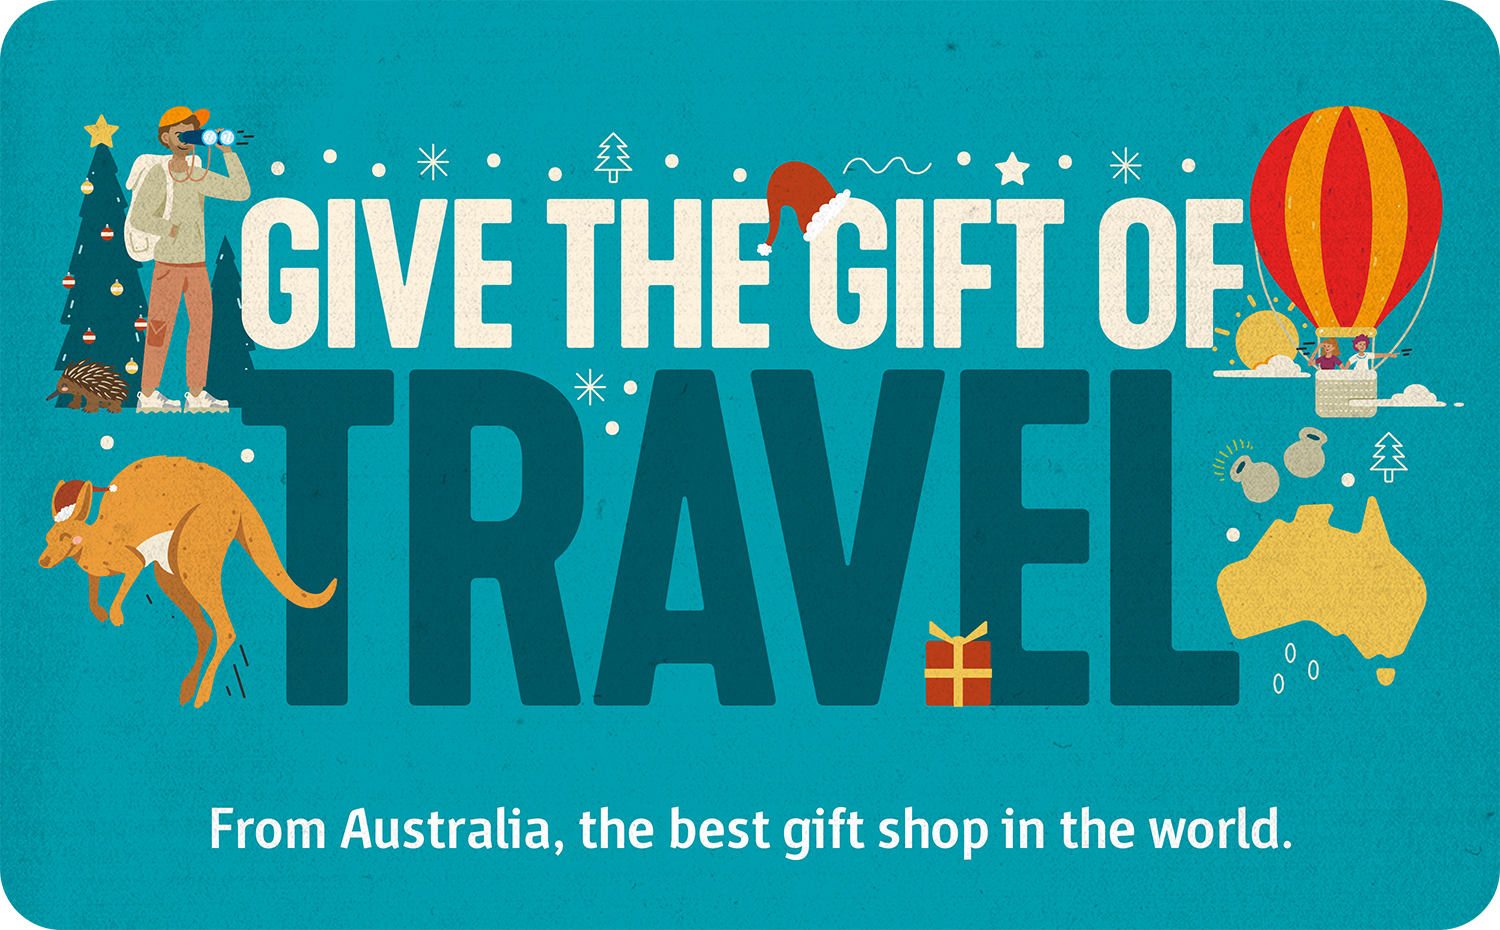 Give the gift of Travel